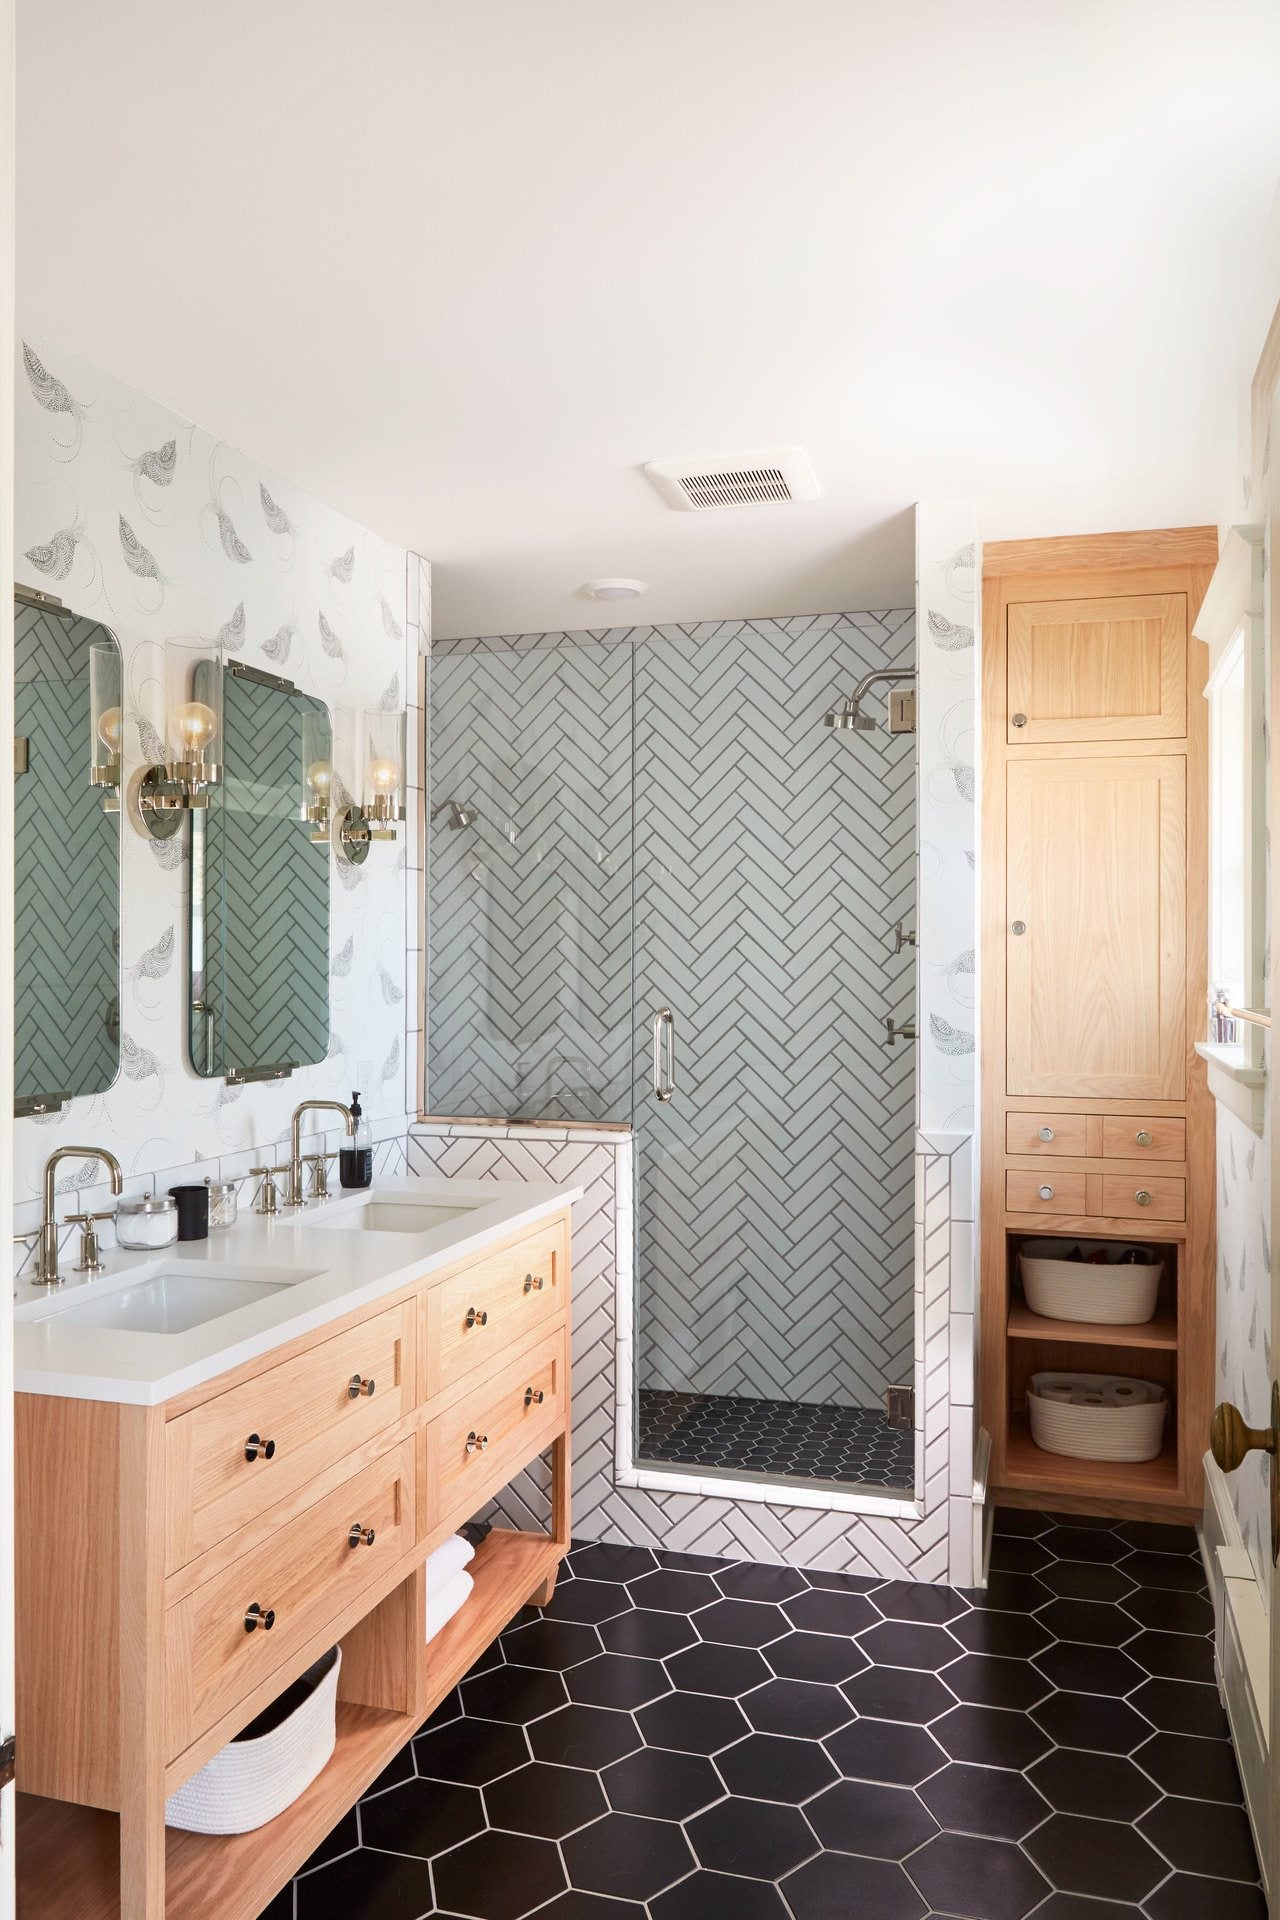 Resolve to Redecorate: Aimee's Home Remodel | Part 1: Master Bathroom | Pajarito Black wallpaper | Laundry Studio | Hygge & West